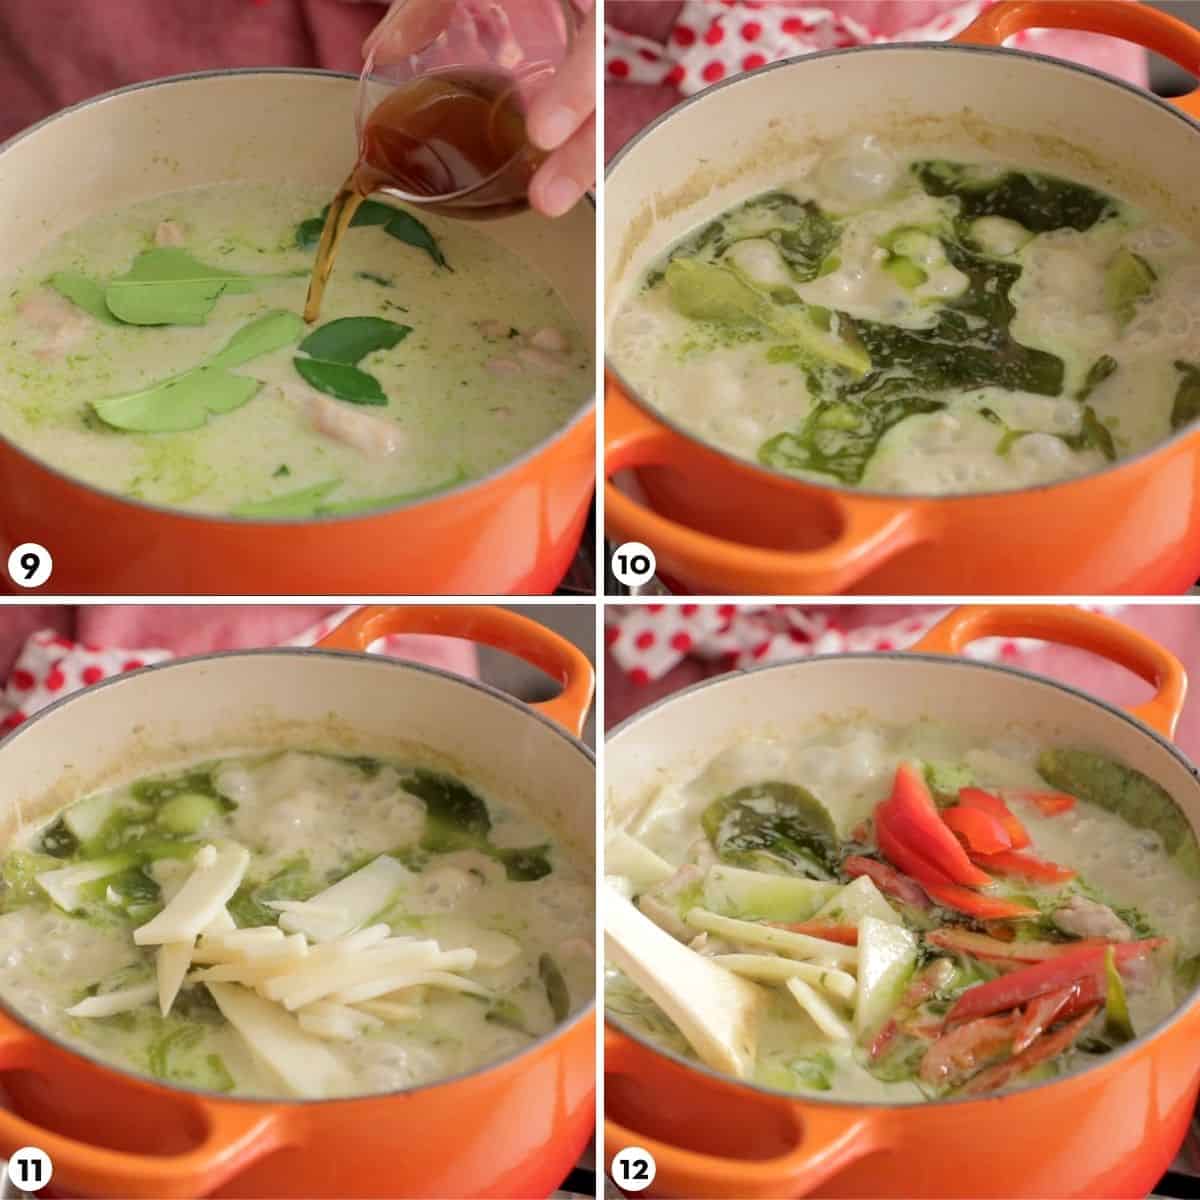 Steps for making green curry chicken steps 9-12